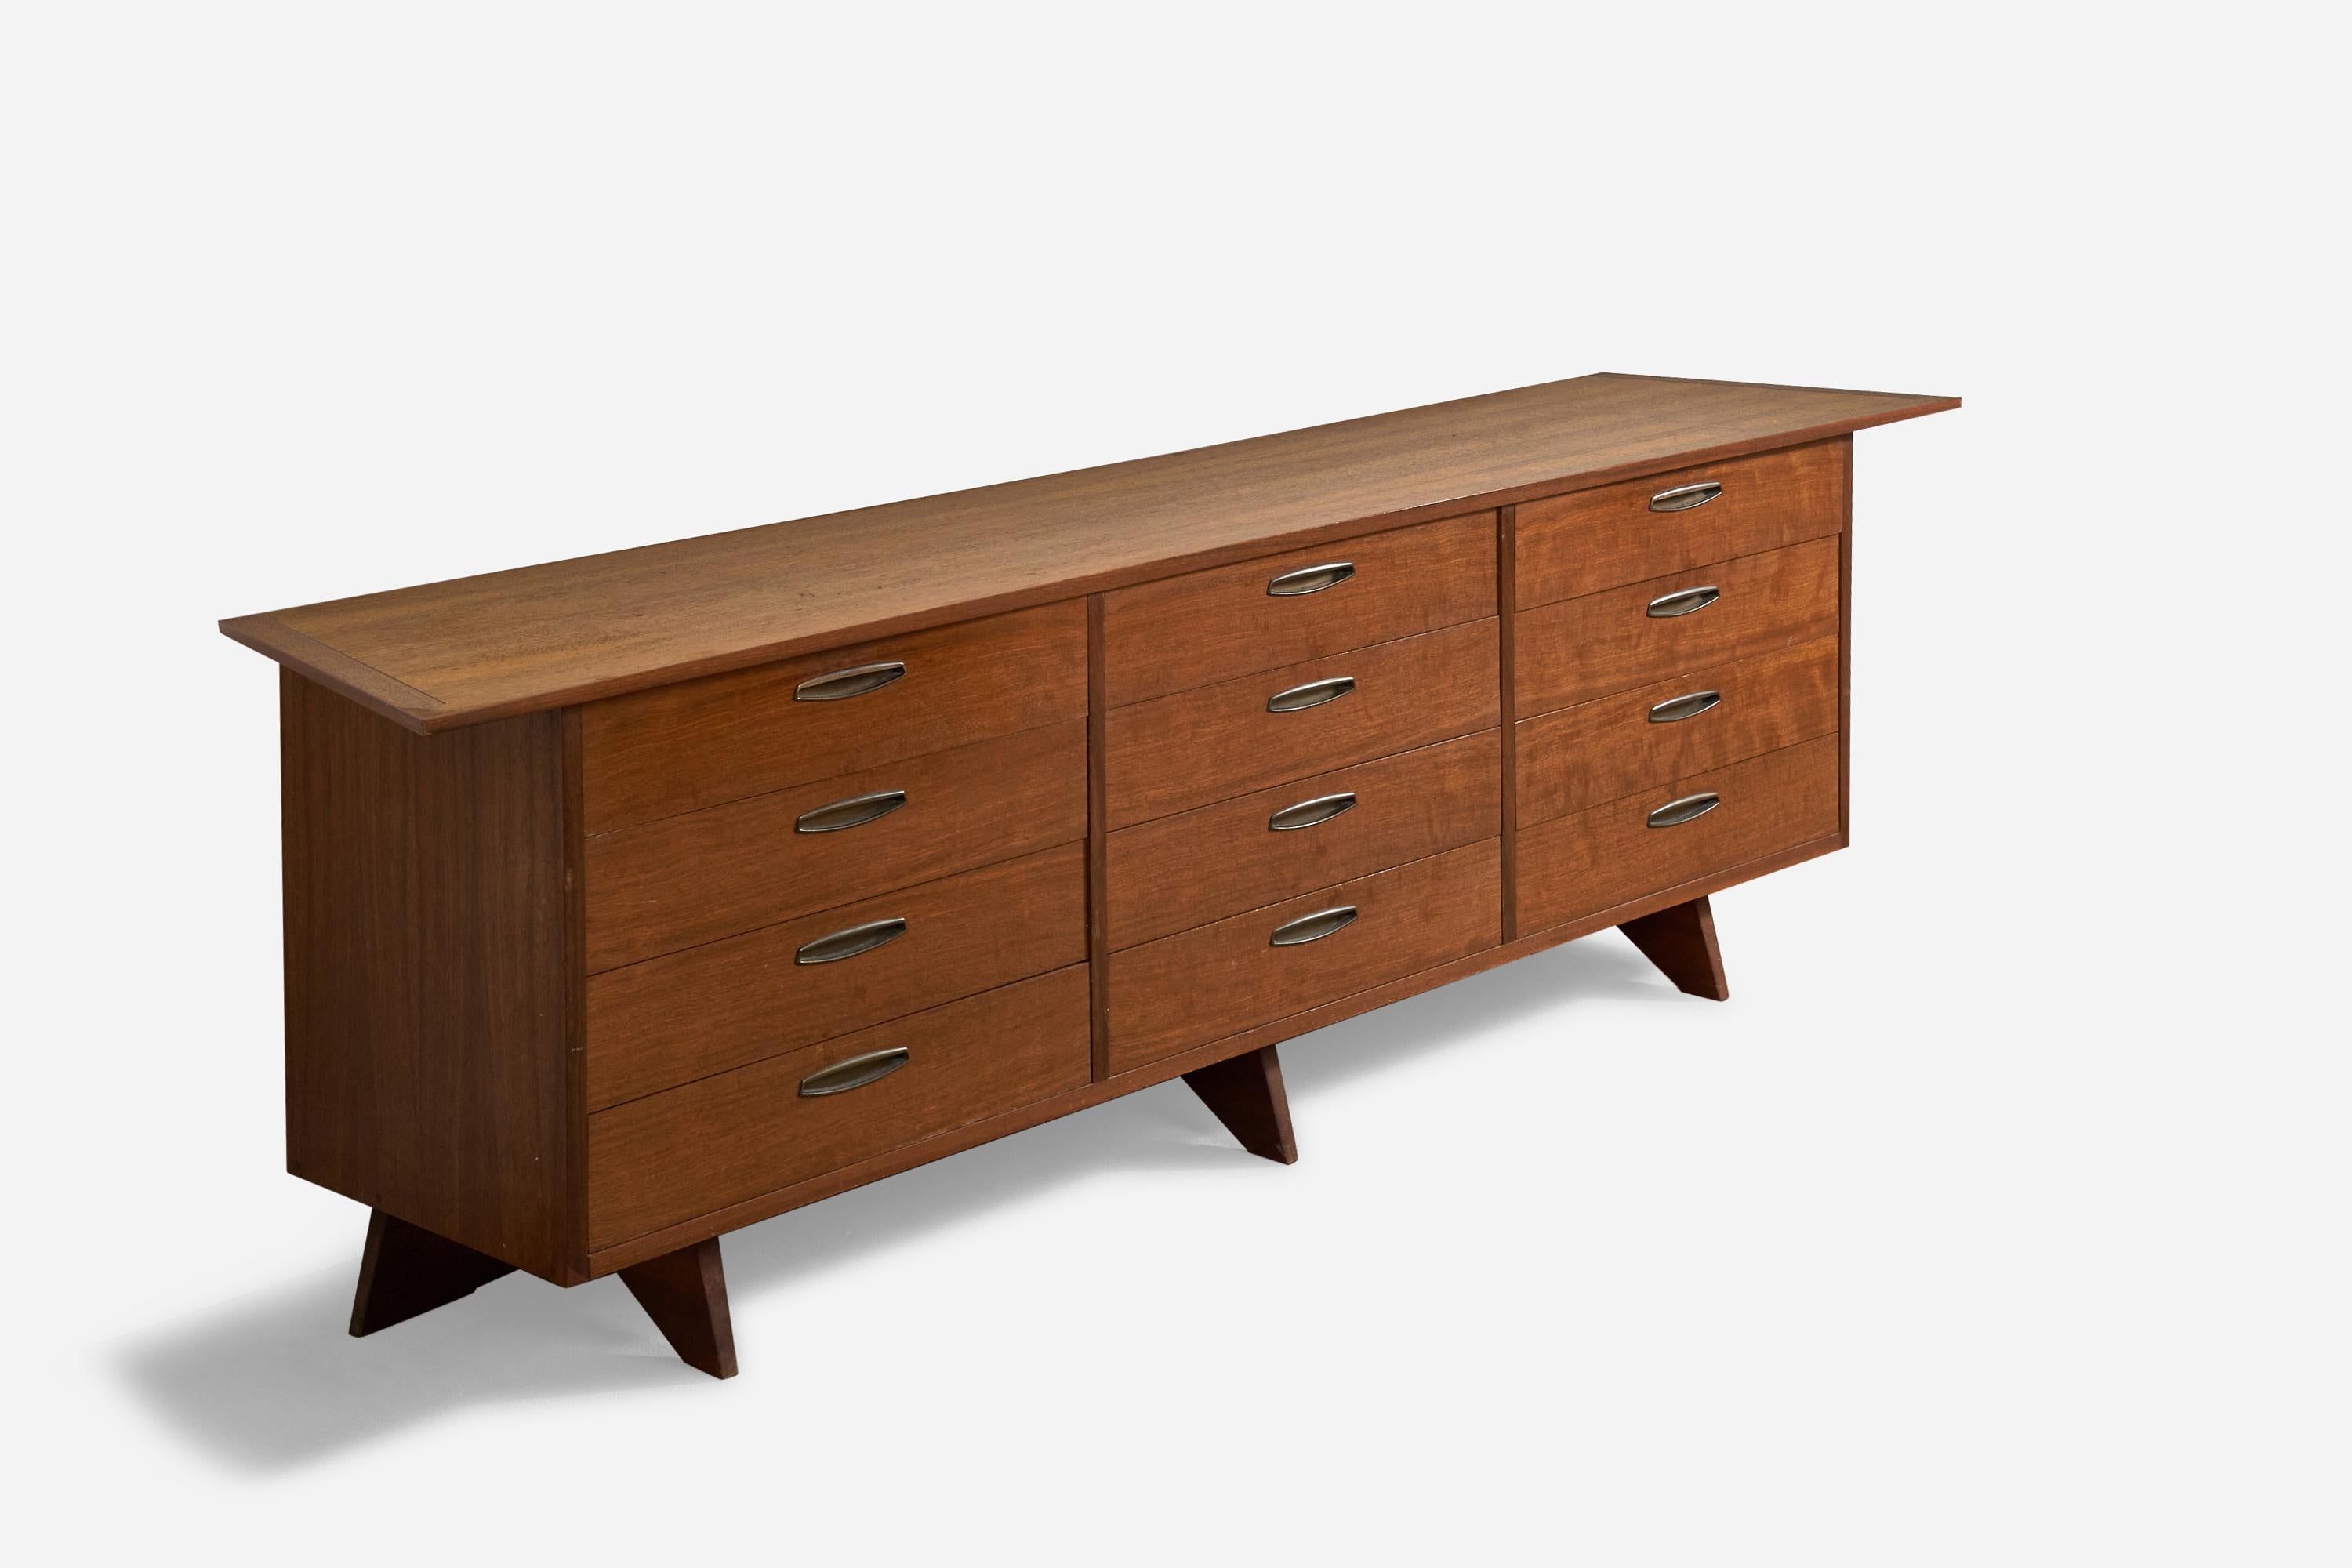 A large walnut chest of drawers or dresser designed by George Nakashima. Produced by Widdicomb Furniture Company, Grand Rapids, Michigan, America, 1960s.

